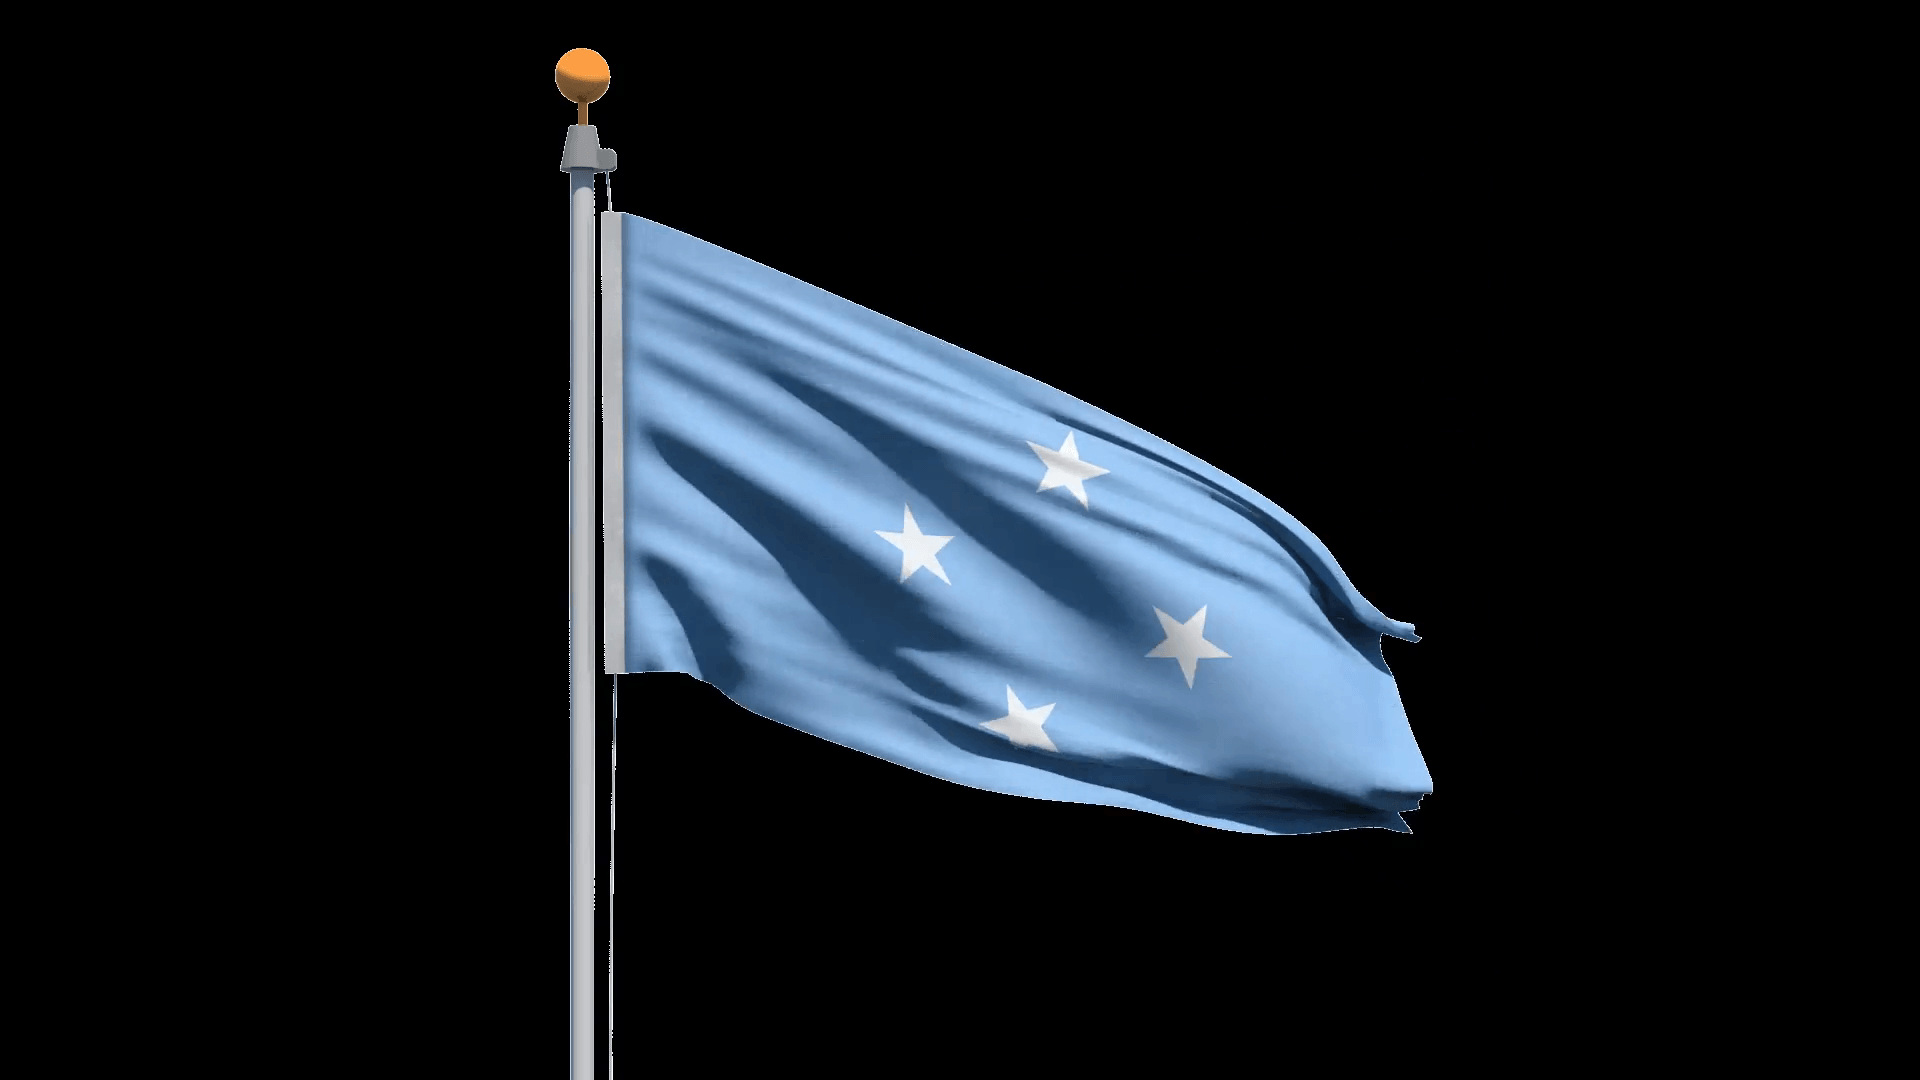 Flag of the Federated States of Micronesia waving in the wind, with